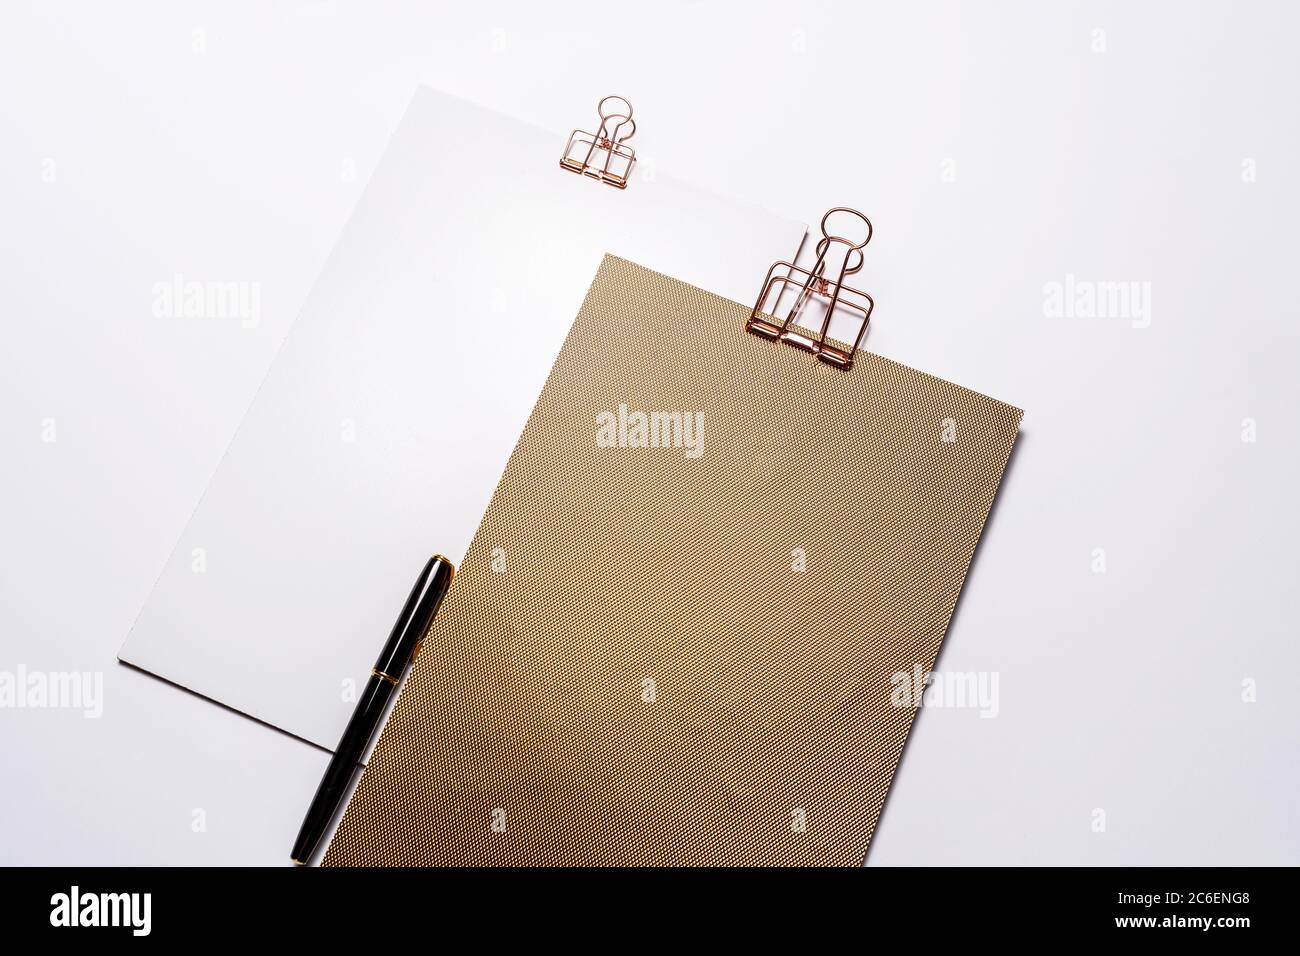 Two golden clipboard, branding stationery mockup and fountain pen on the cleared desk. Corporate modern items set, nobody Stock Photo